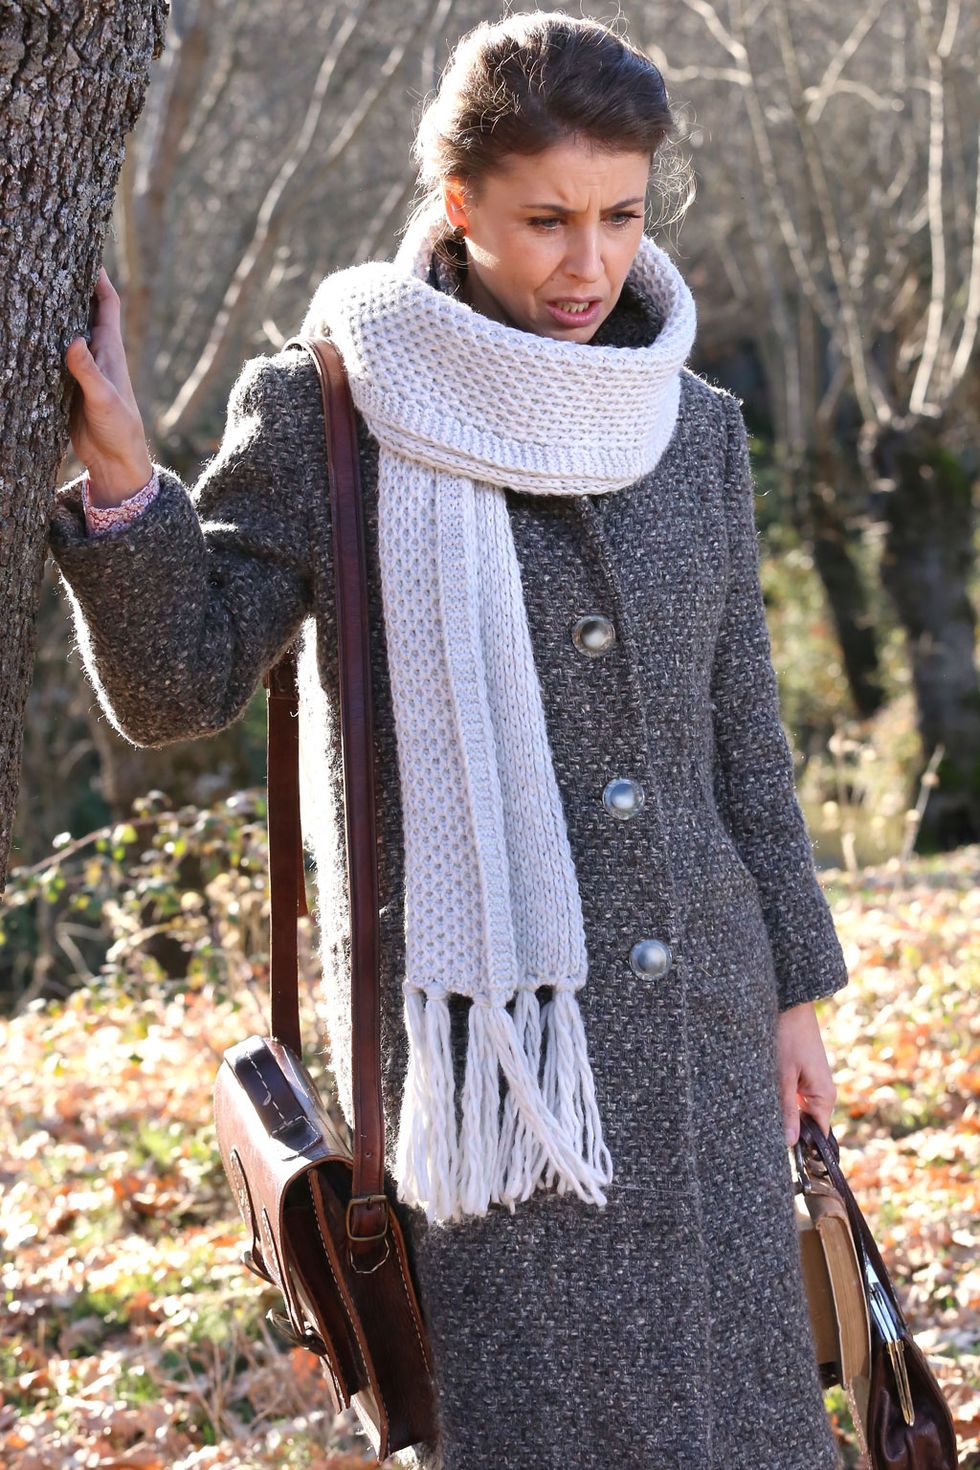 Textile, Outerwear, Winter, People in nature, Street fashion, Wool, Fashion, Bag, Woolen, Knitting, 